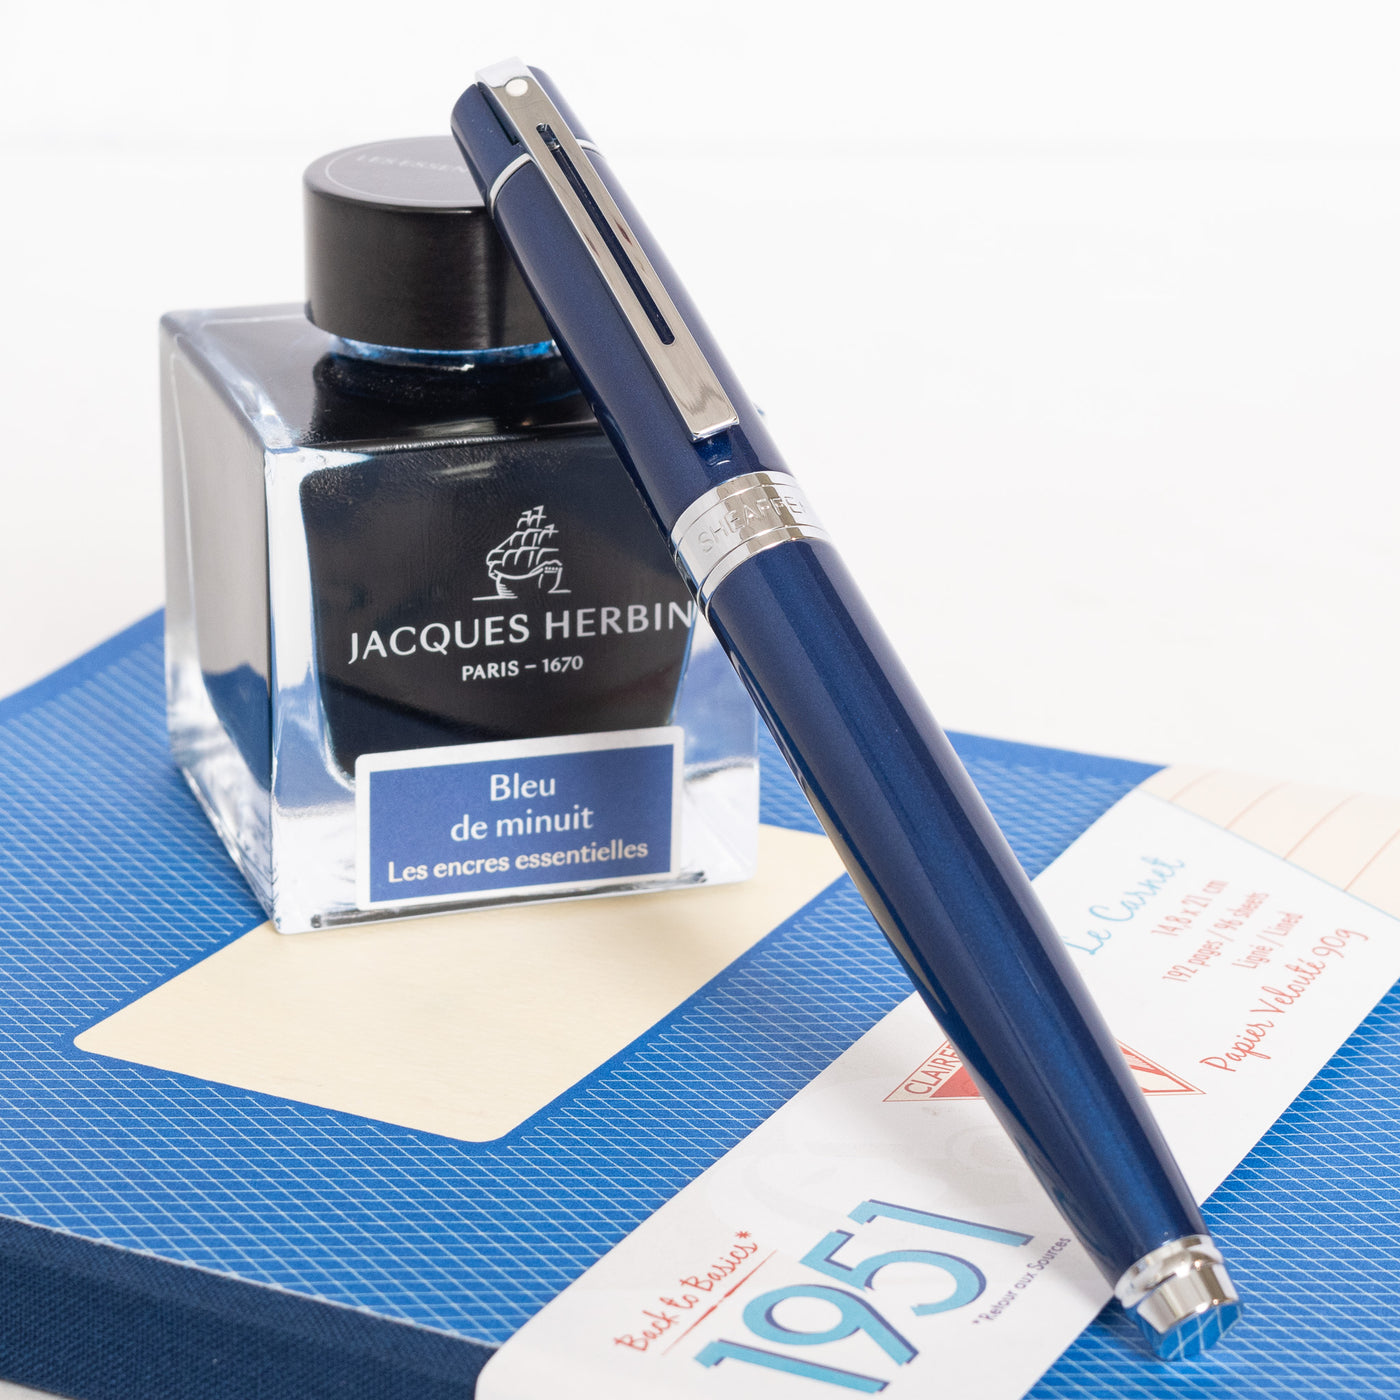 Sheaffer 300 Fountain Pen - Glossy Blue with Chrome Cap capped